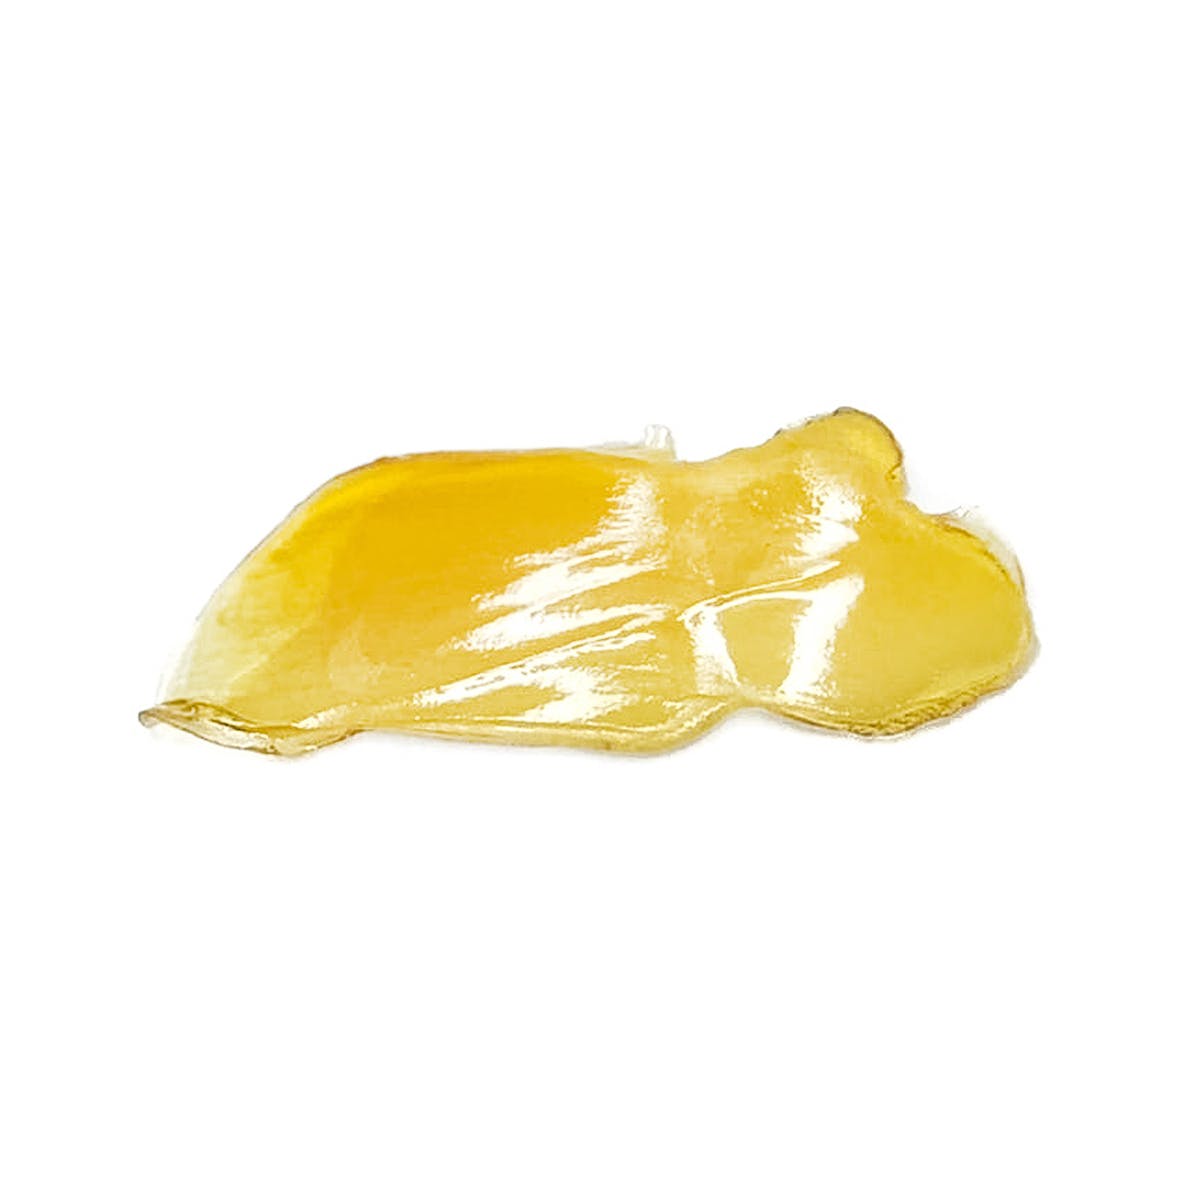 marijuana-dispensaries-cathedral-city-care-collective-north-in-cathedral-city-clementine-live-resin-shatter